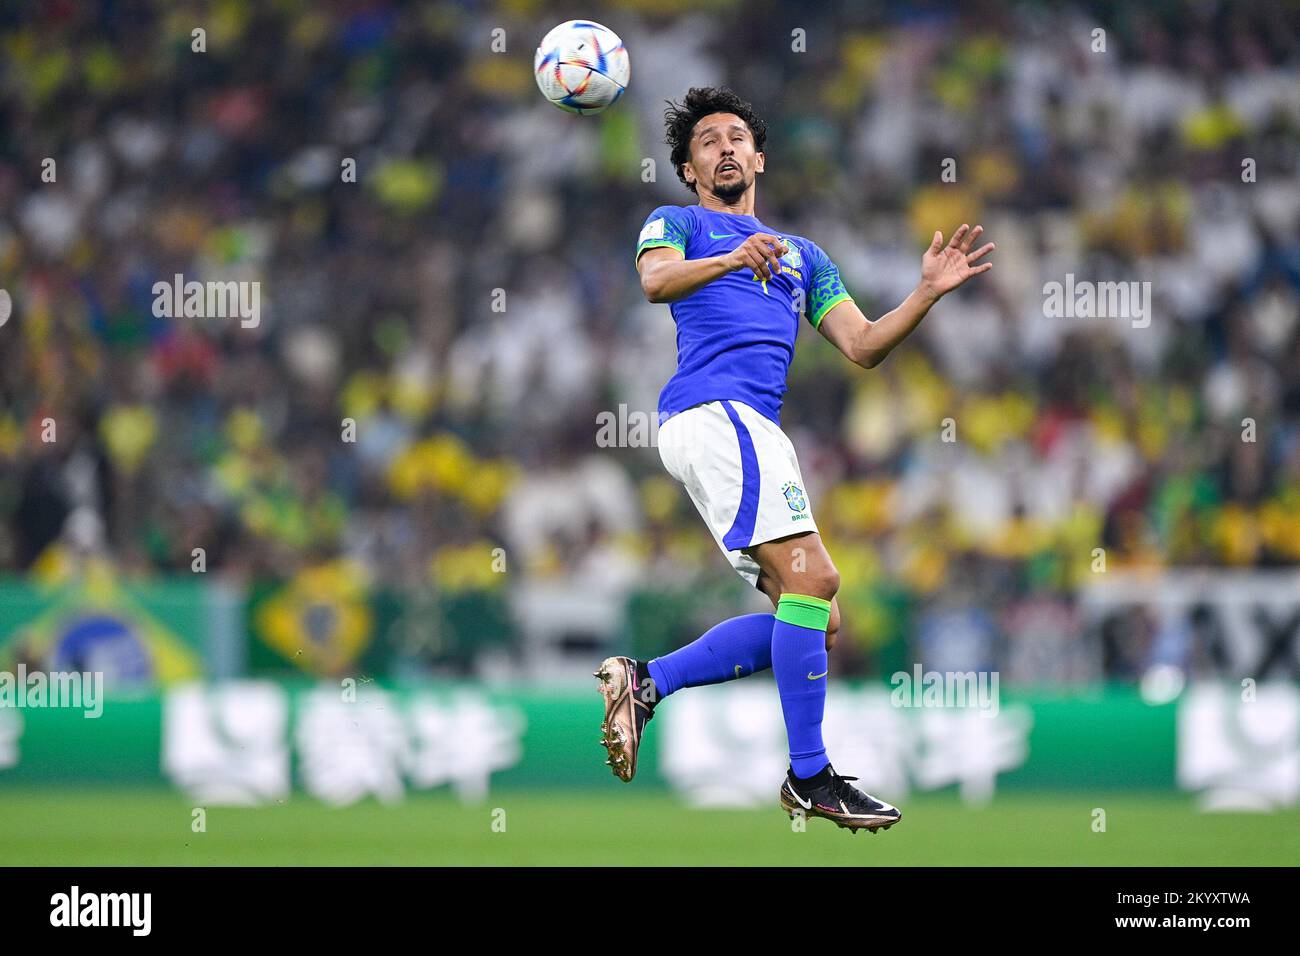 LUSAIL CITY, QATAR - DECEMBER 2: Marquinhos of Brazil wins a defensive header during the Group G - FIFA World Cup Qatar 2022 match between Cameroon and Brazil at the Lusail Stadium on December 2, 2022 in Lusail City, Qatar (Photo by Pablo Morano/BSR Agency) Stock Photo